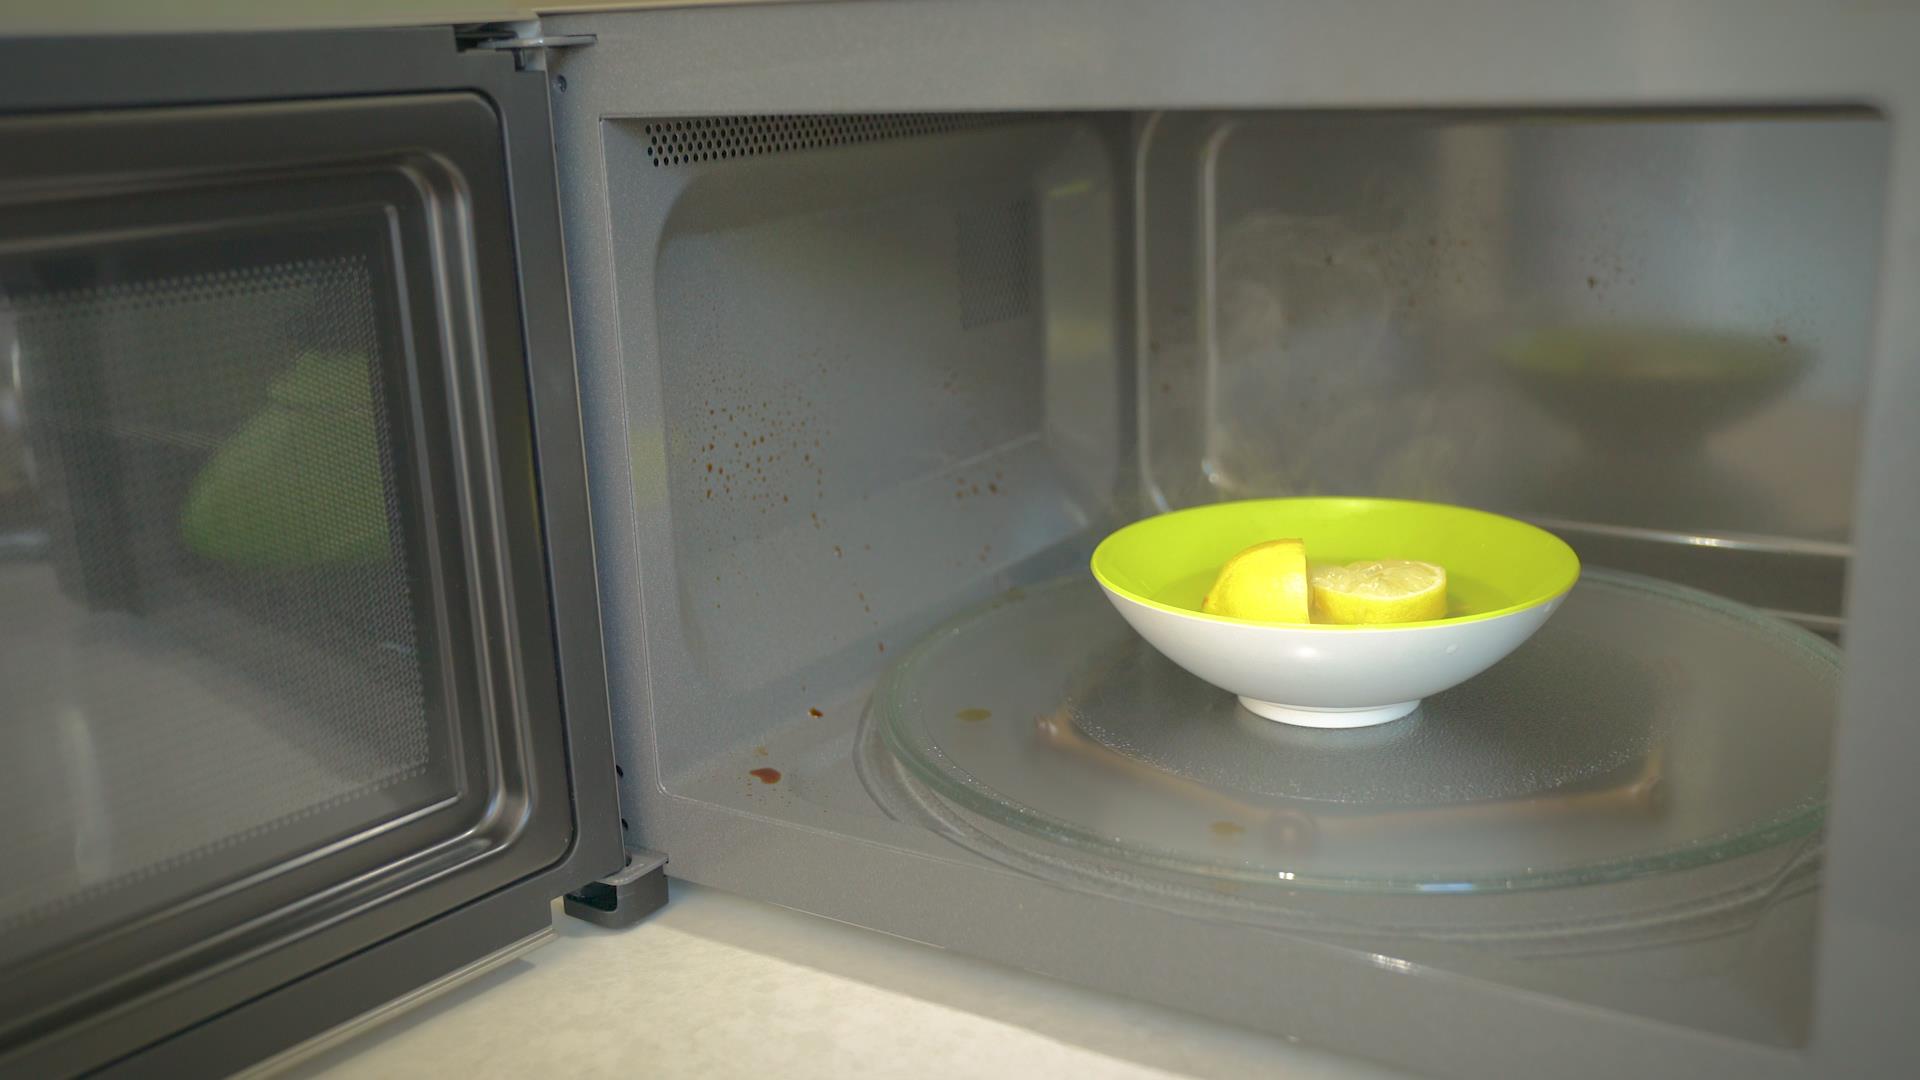 How to clean your microwave without scrubbing